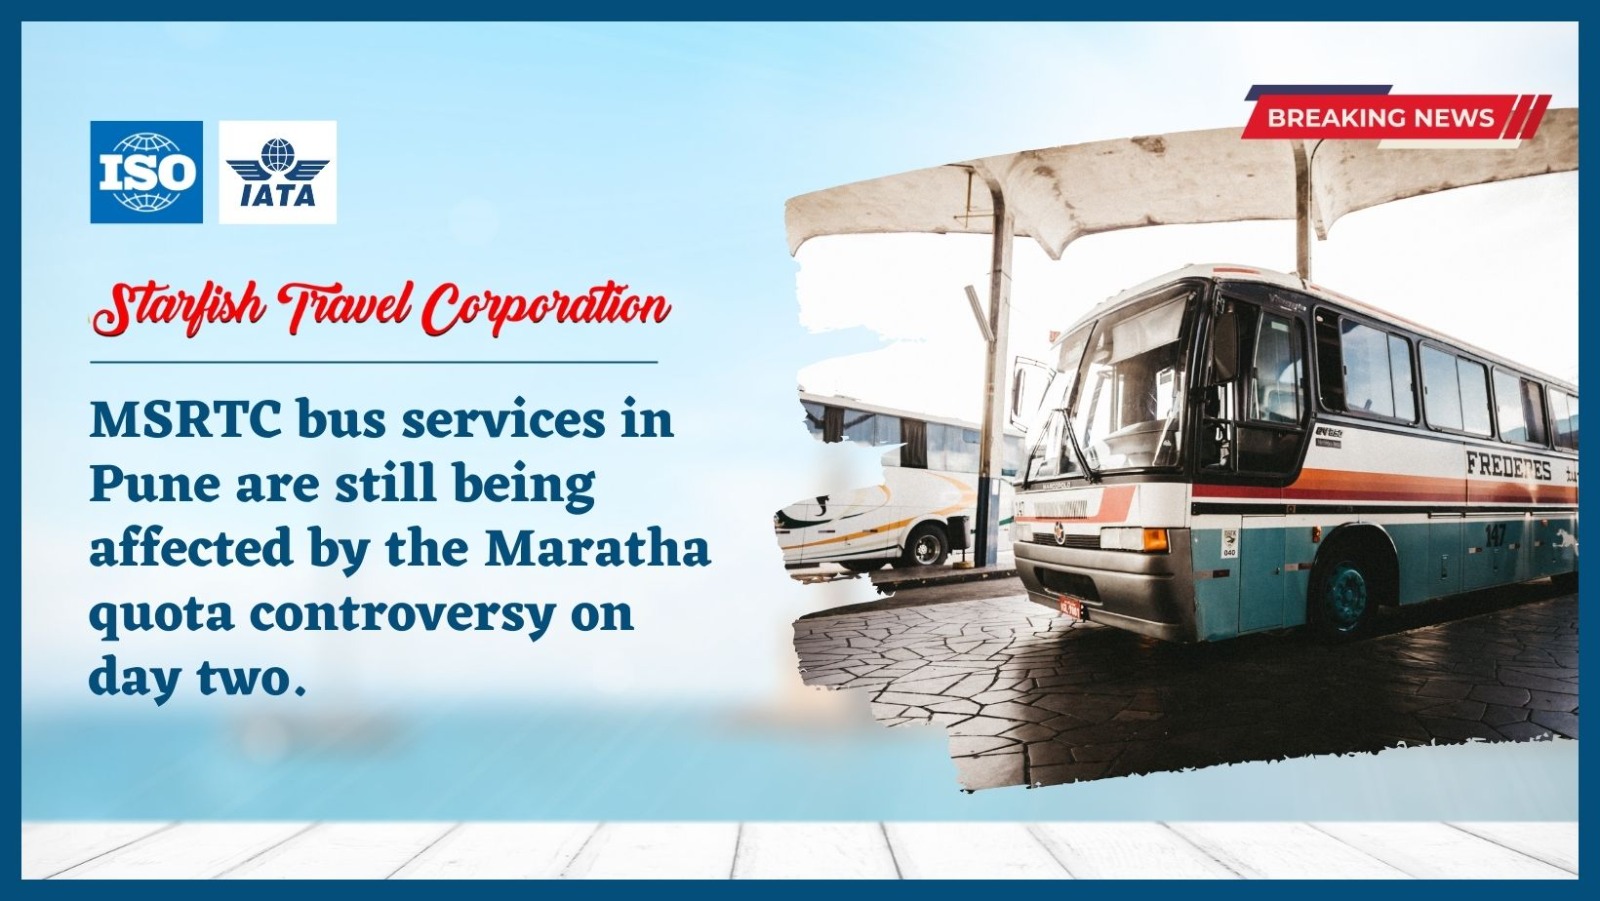 MSRTC bus services in Pune are still being affected by the Maratha quota controversy on day two.